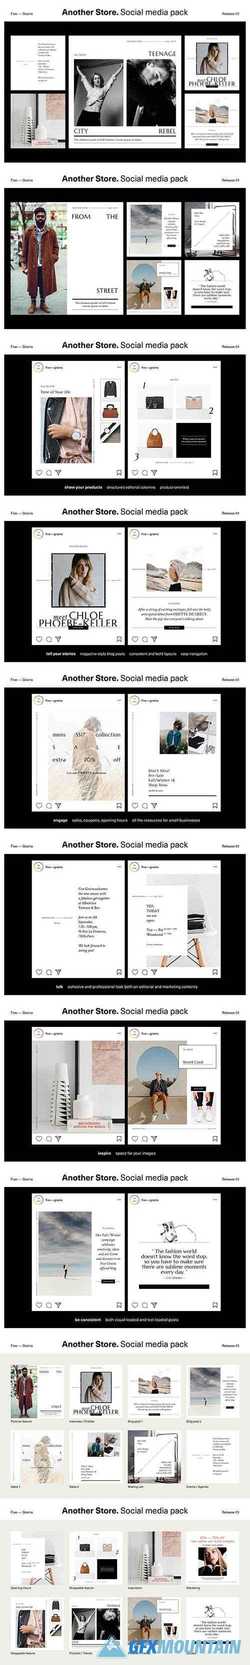 Another Store. Social media pack   1863041